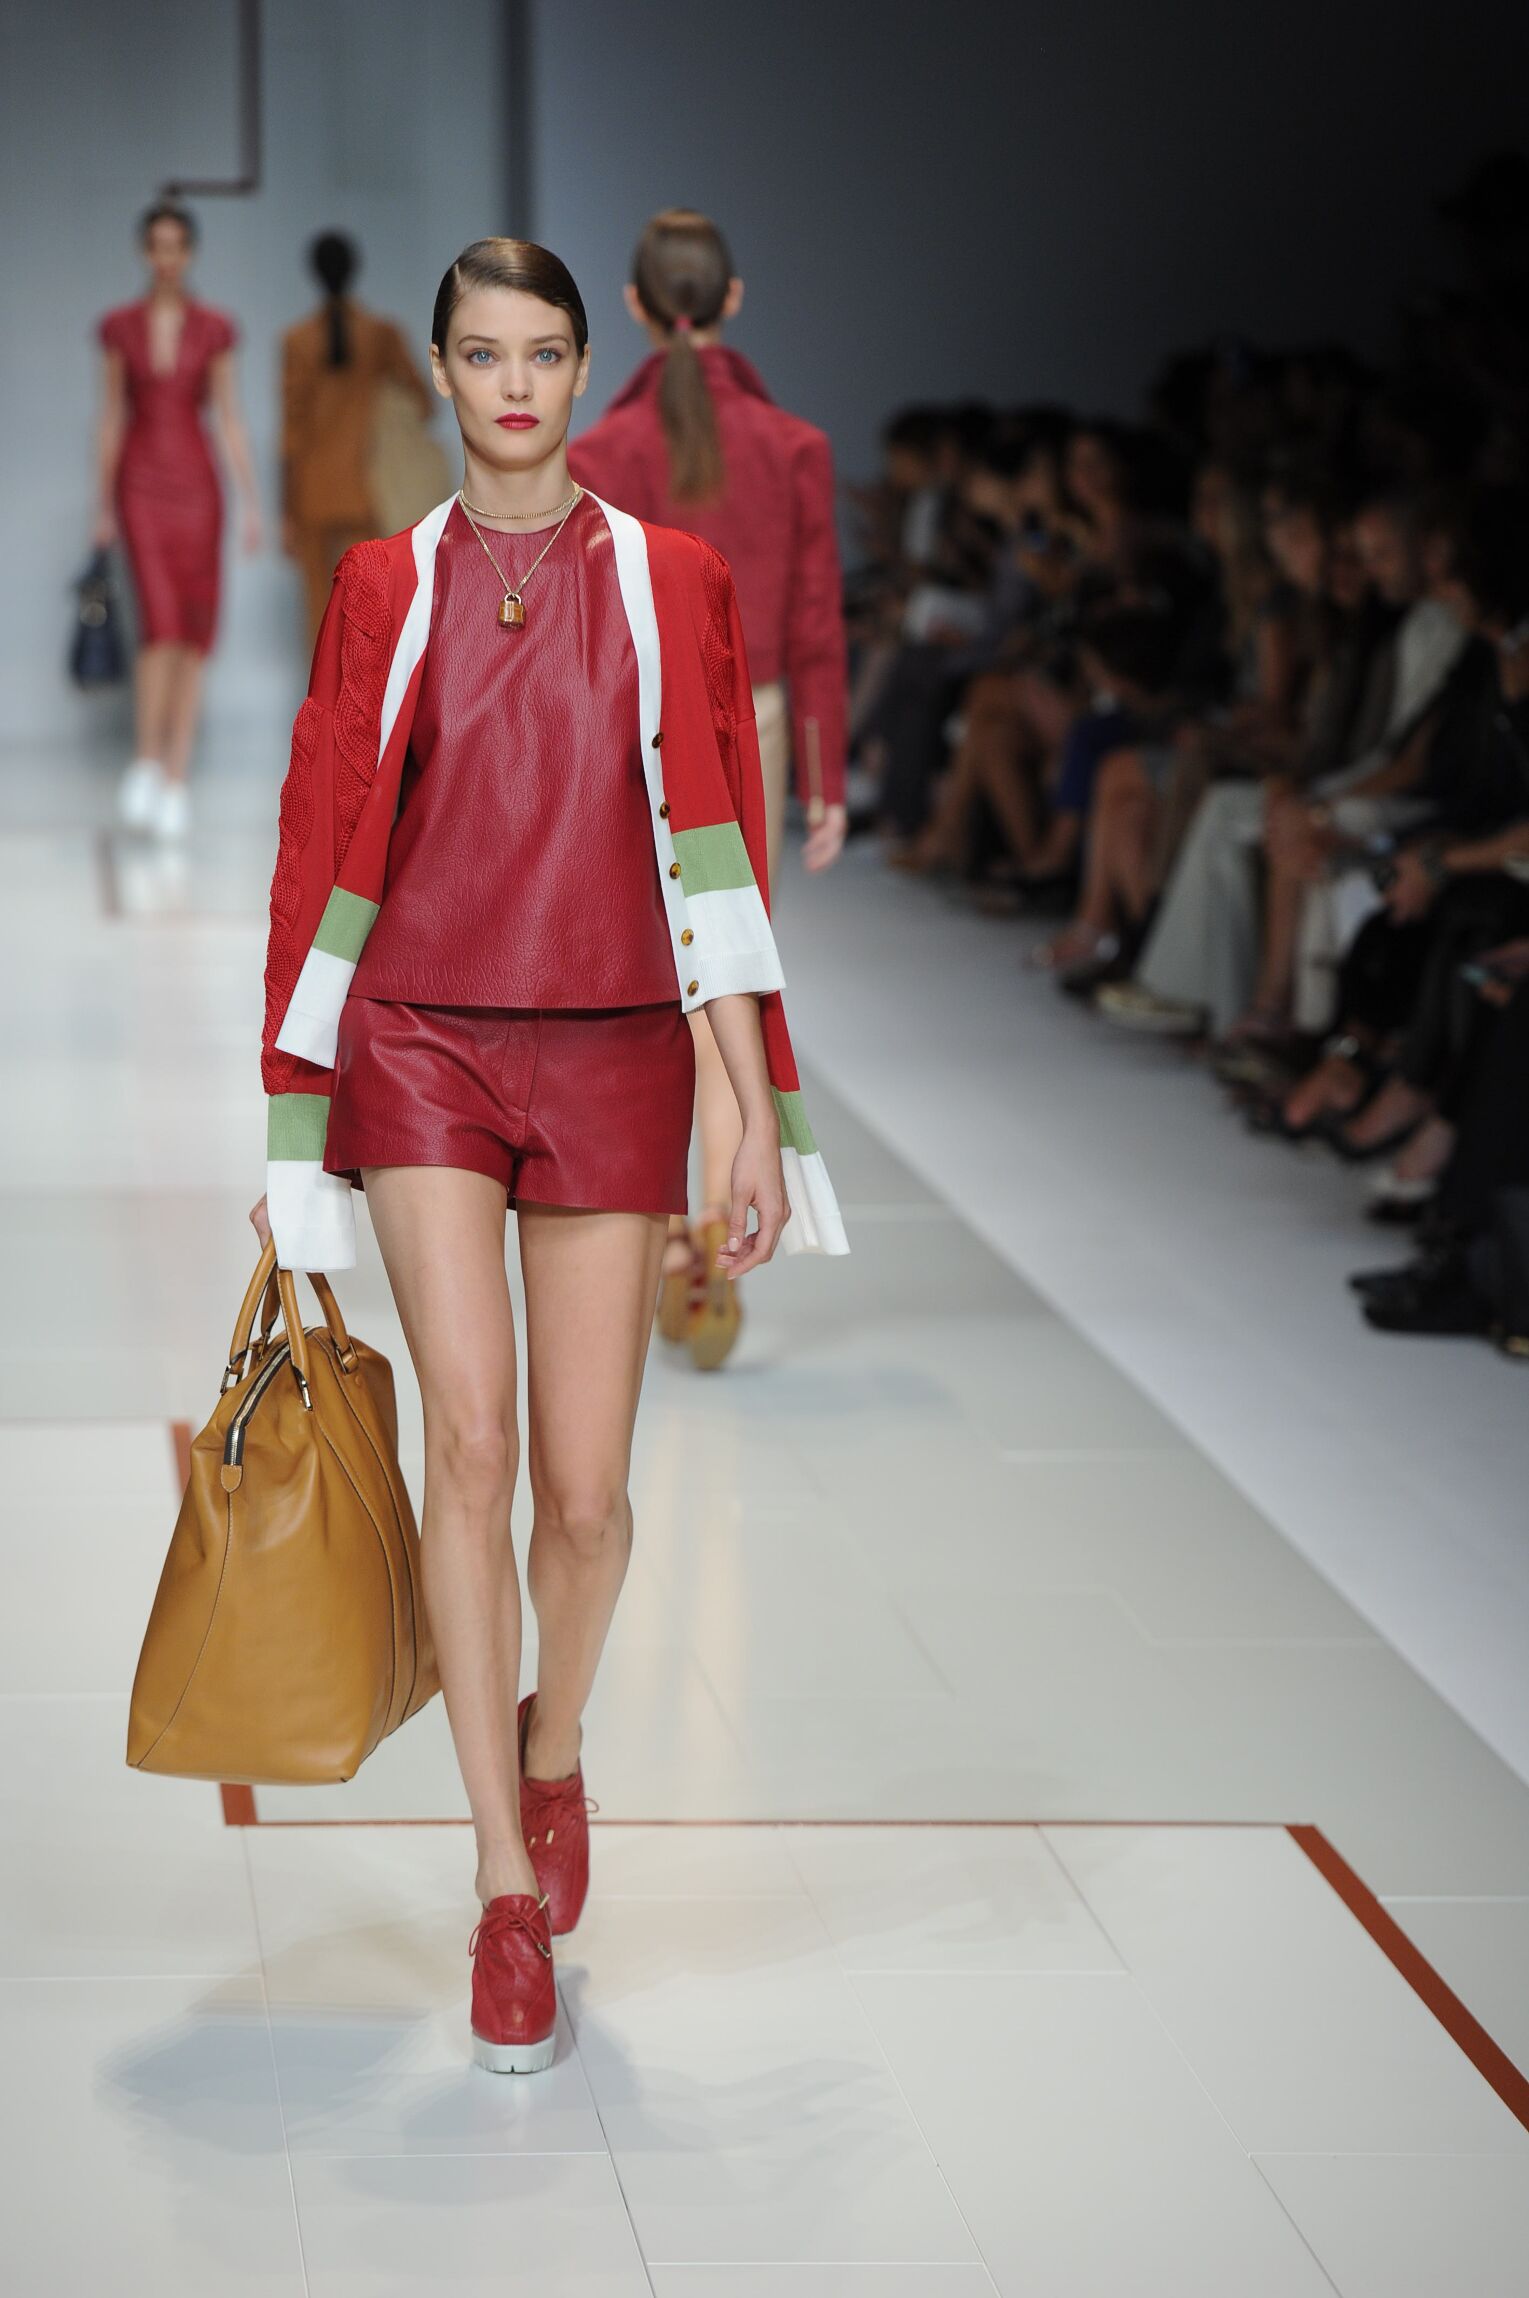 TRUSSARDI SPRING SUMMER 2015 WOMEN'S COLLECTION | The Skinny Beep